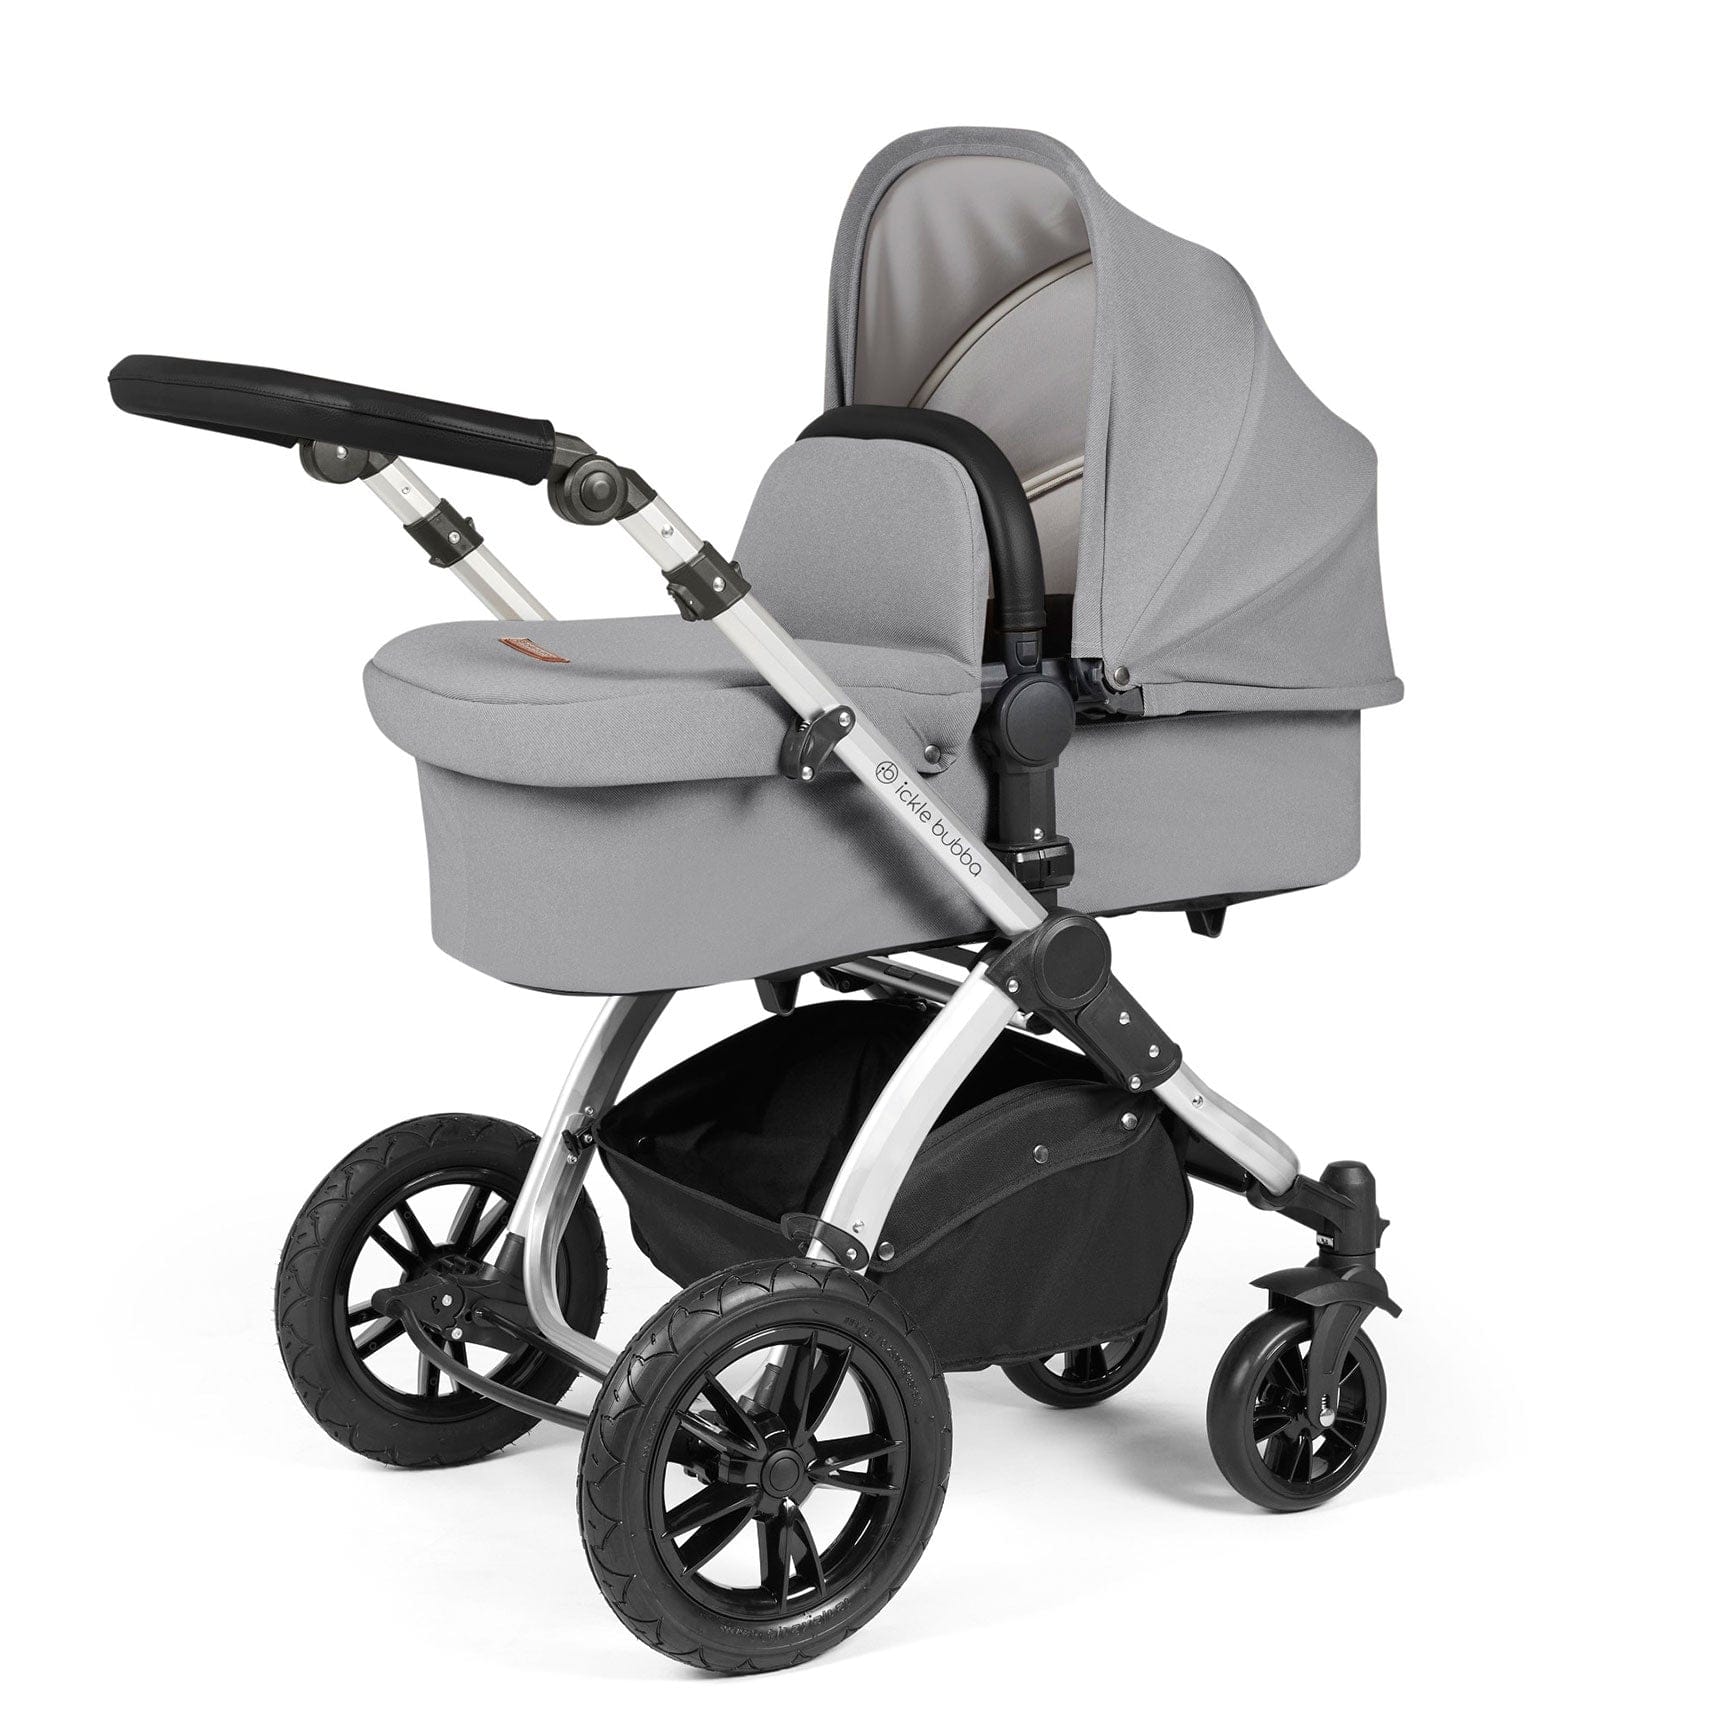 Ickle Bubba travel systems Ickle Bubba Stomp Luxe 2 in 1 Plus Pushchair & Carrycot - Silver/Pearl Grey/Black 10-003-001-259